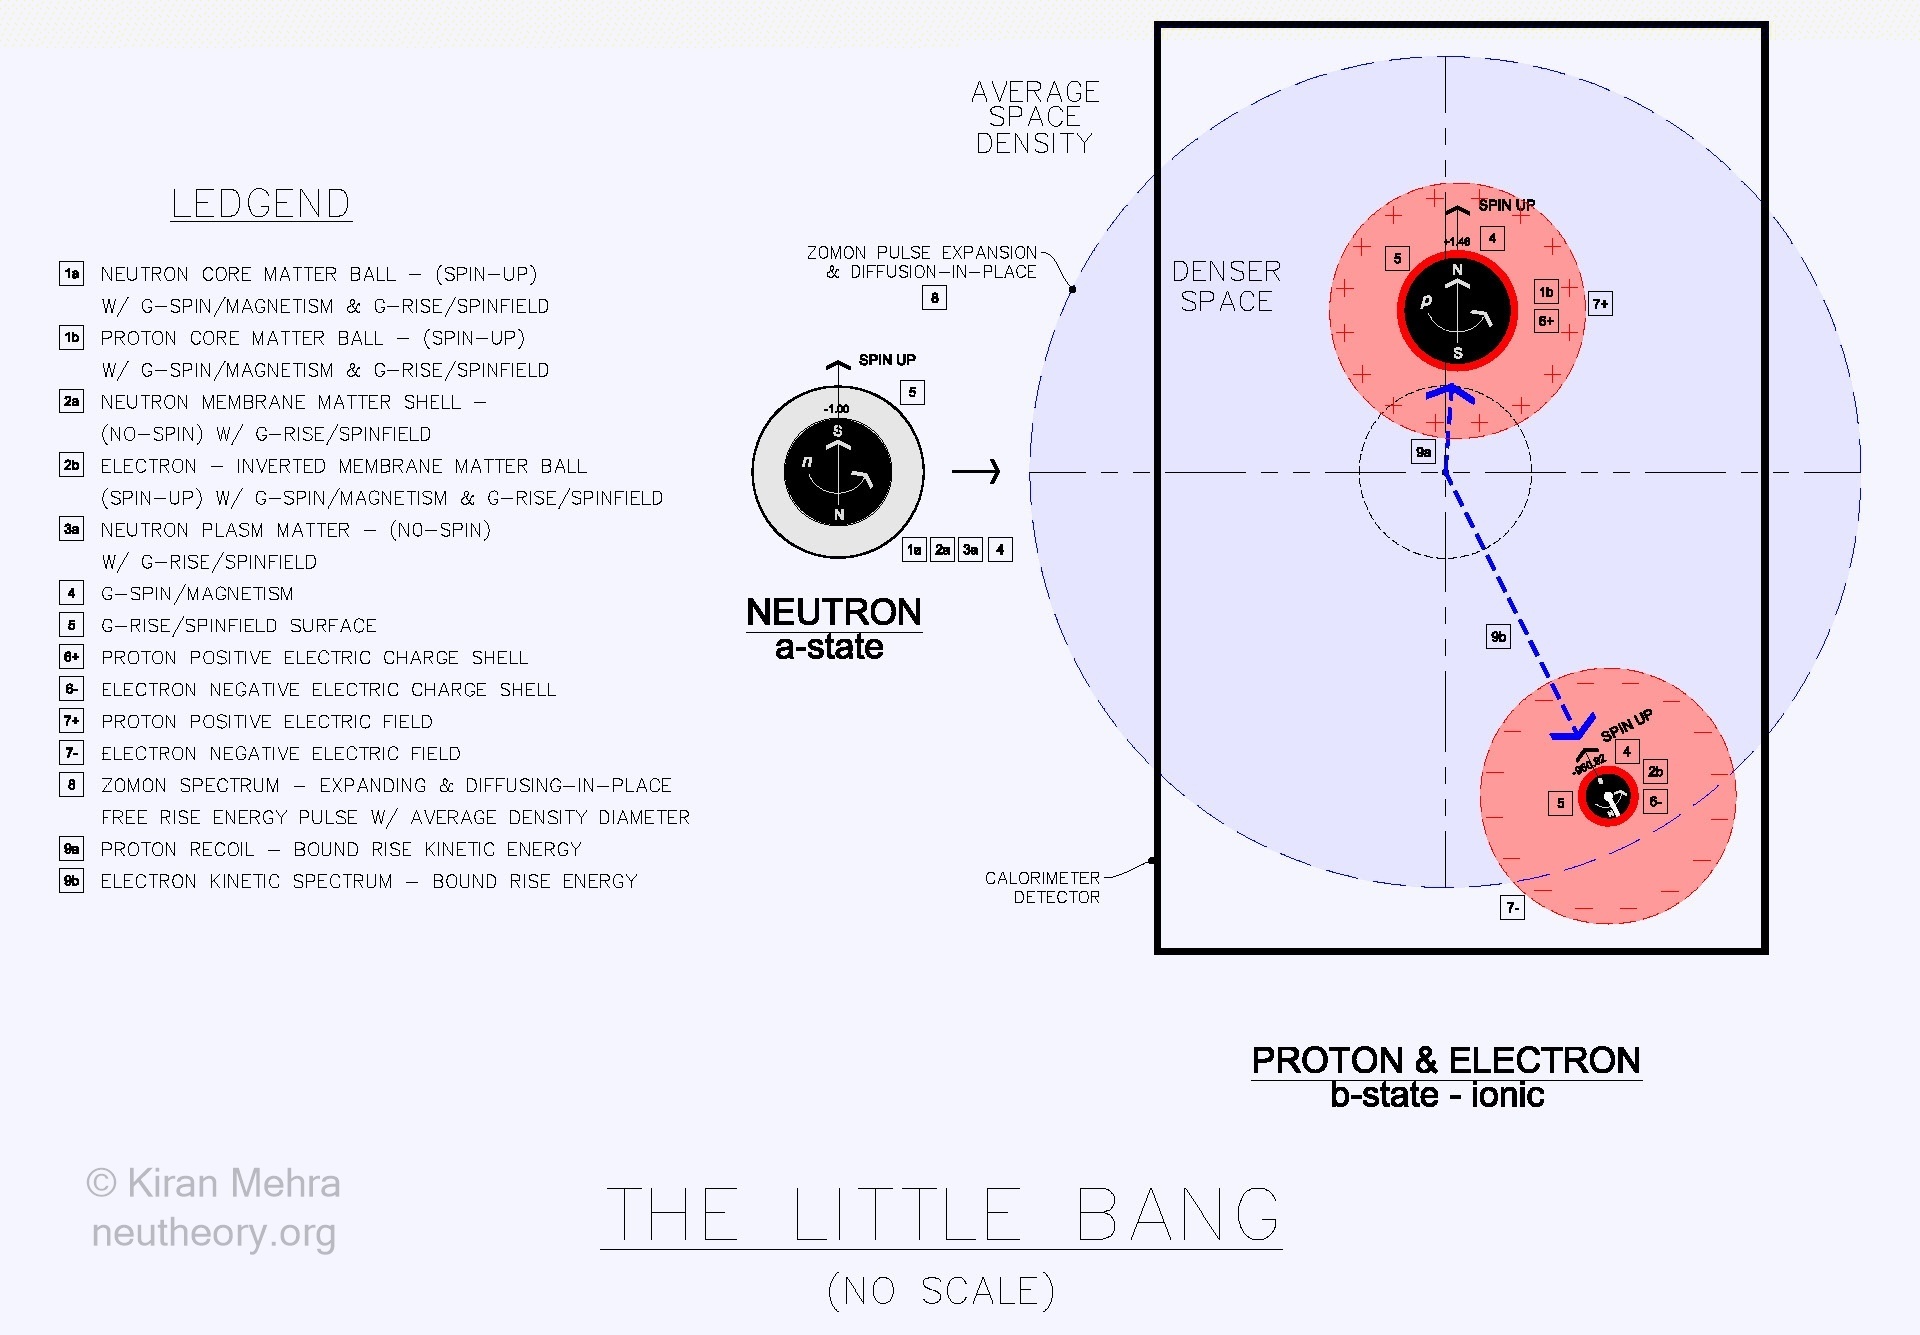 black circle with a black ball representing the neutron and a black box containing two black balls with red auras representing the proton/electron matter couple